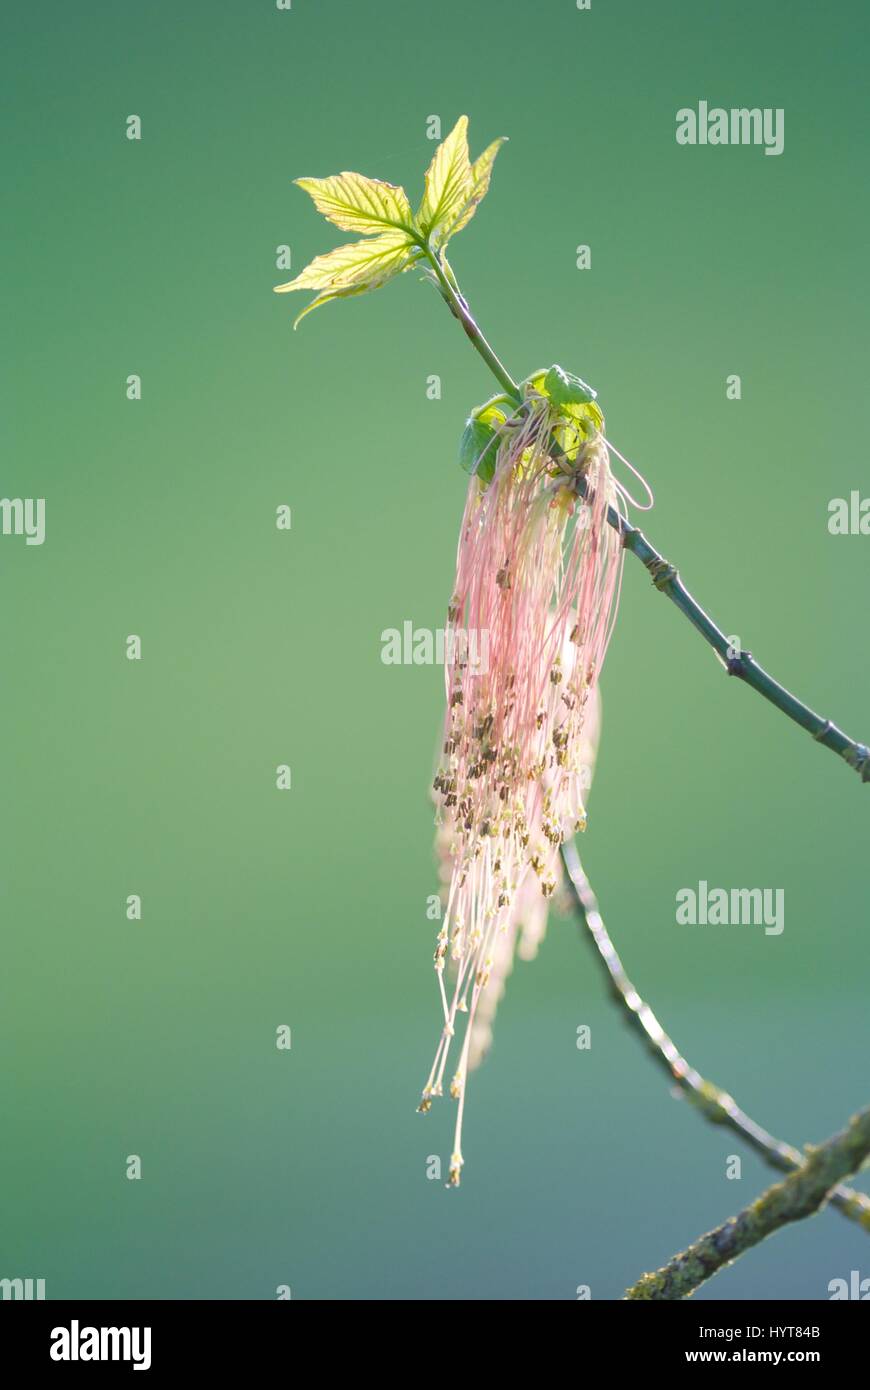 A budding stalk and flower on a tree Stock Photo